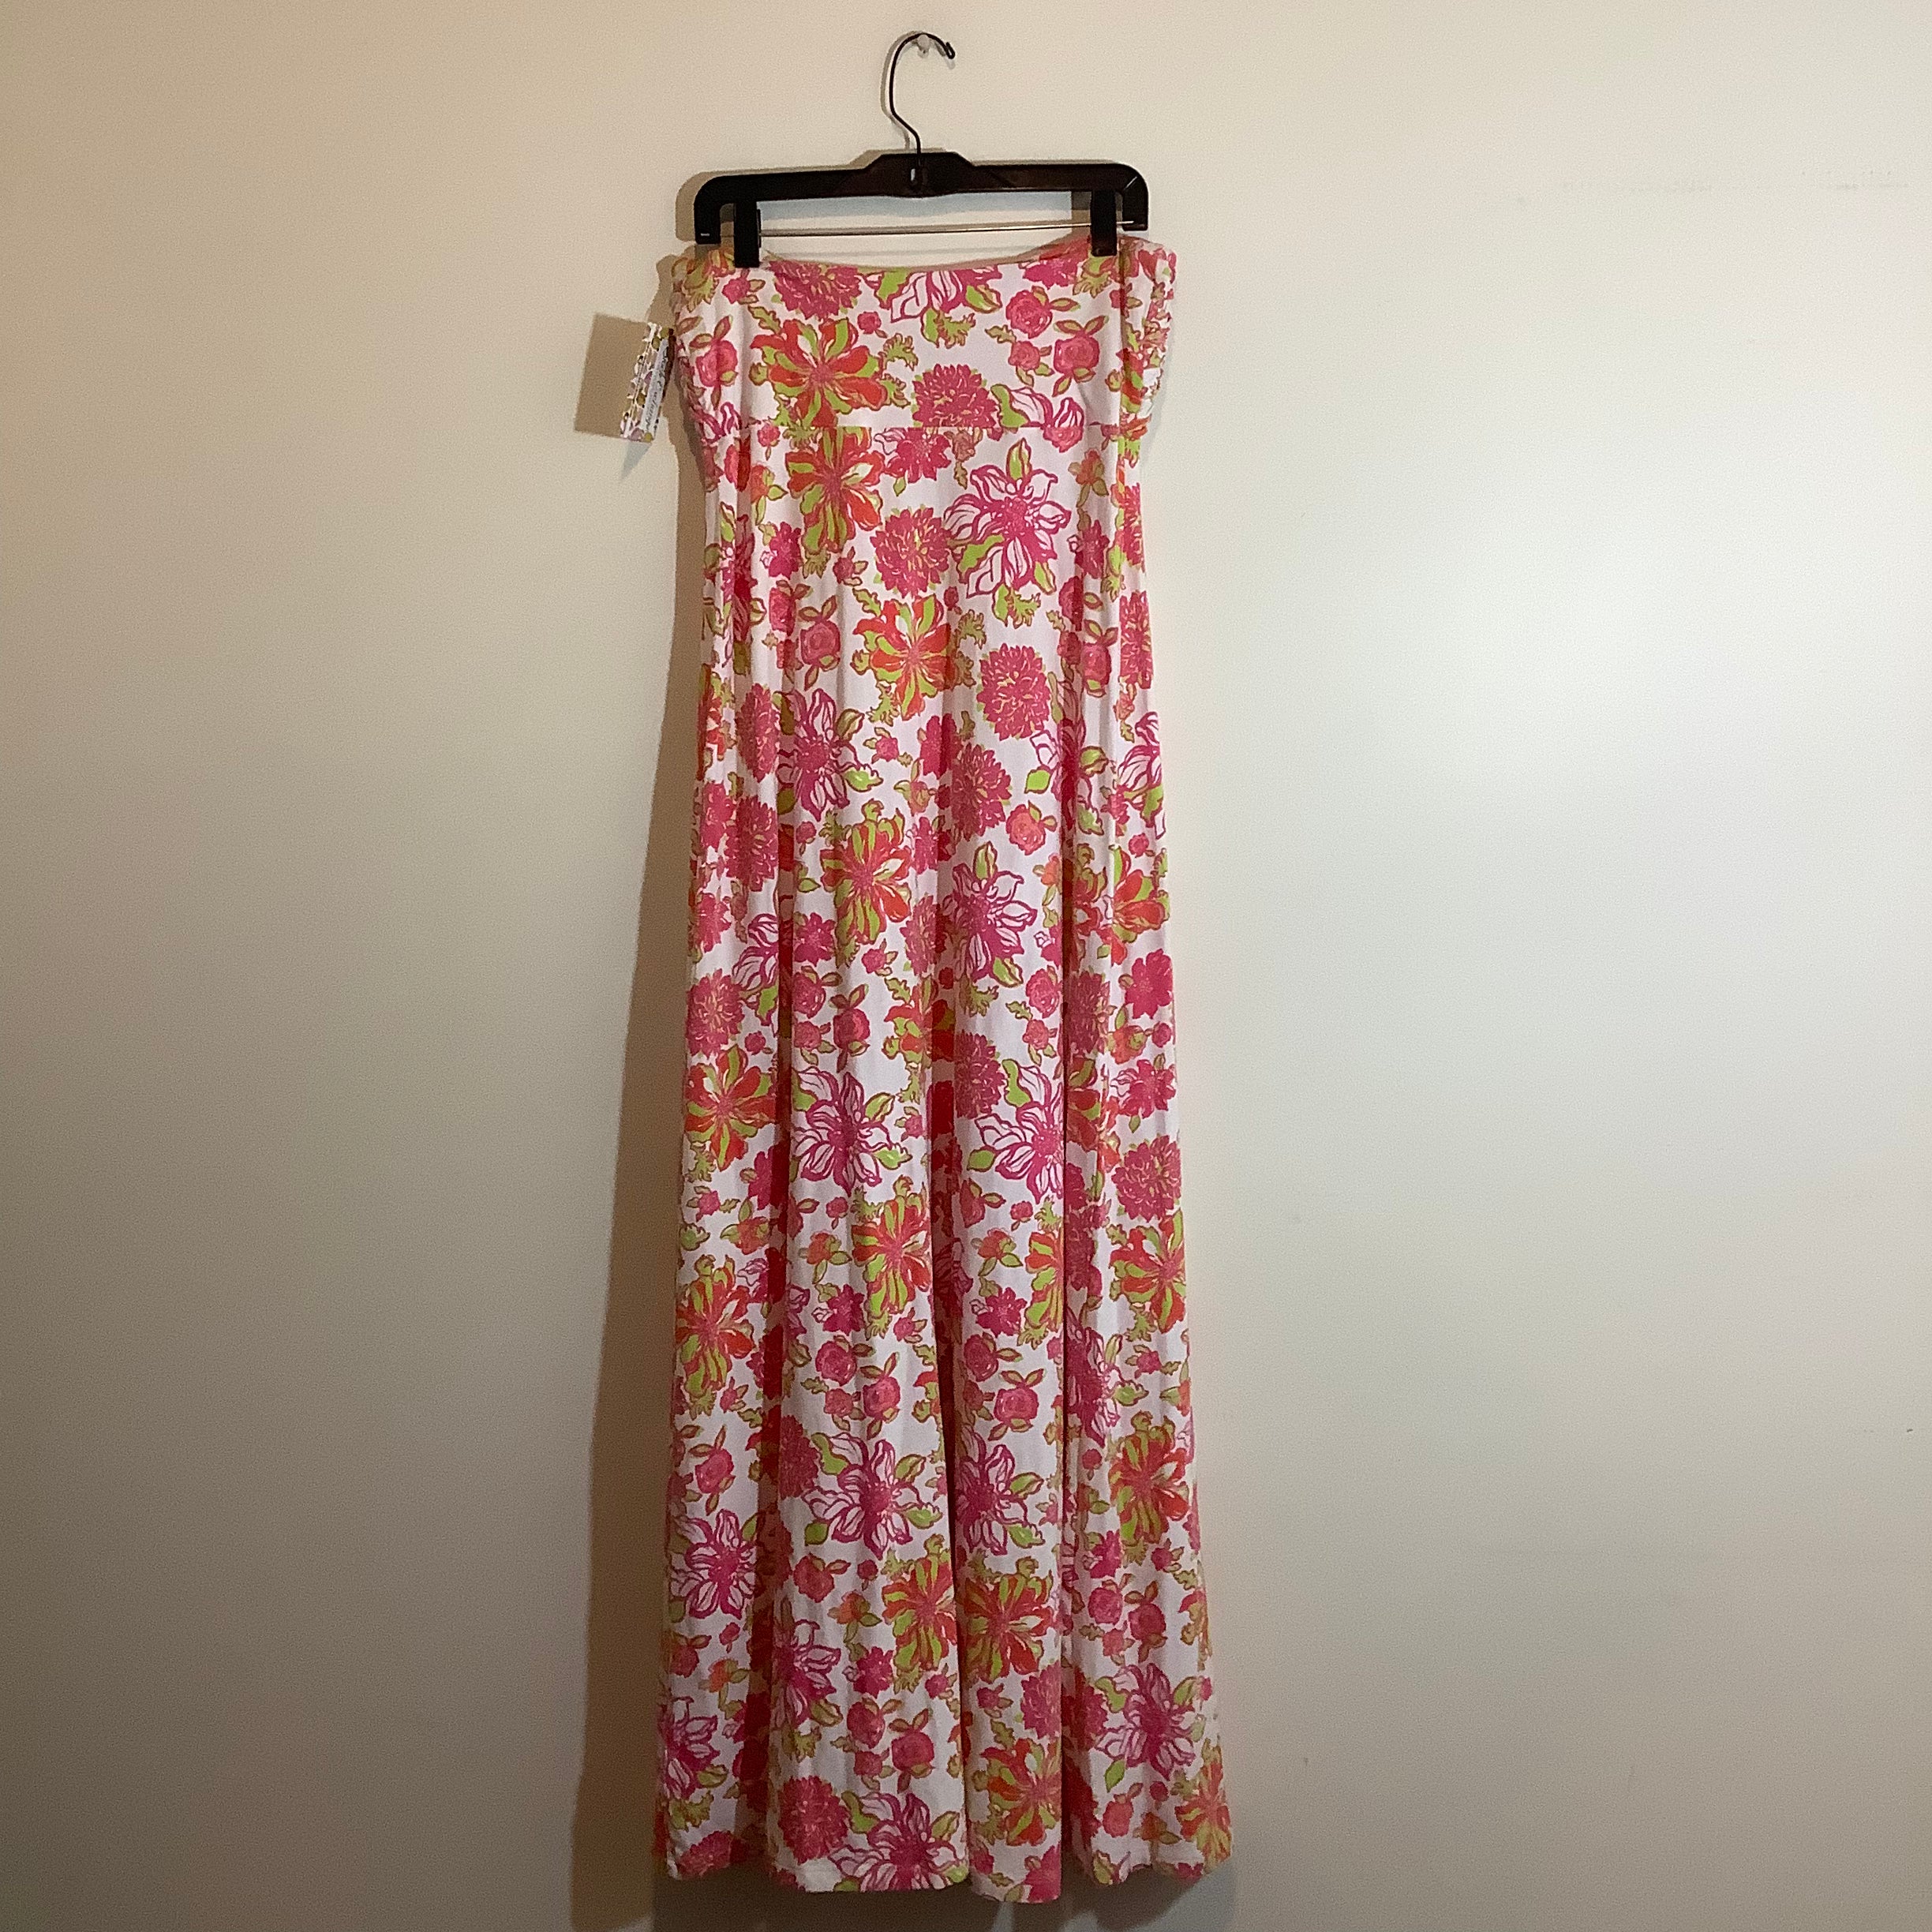 Lilly Pulitzer Pink Dress Size Large